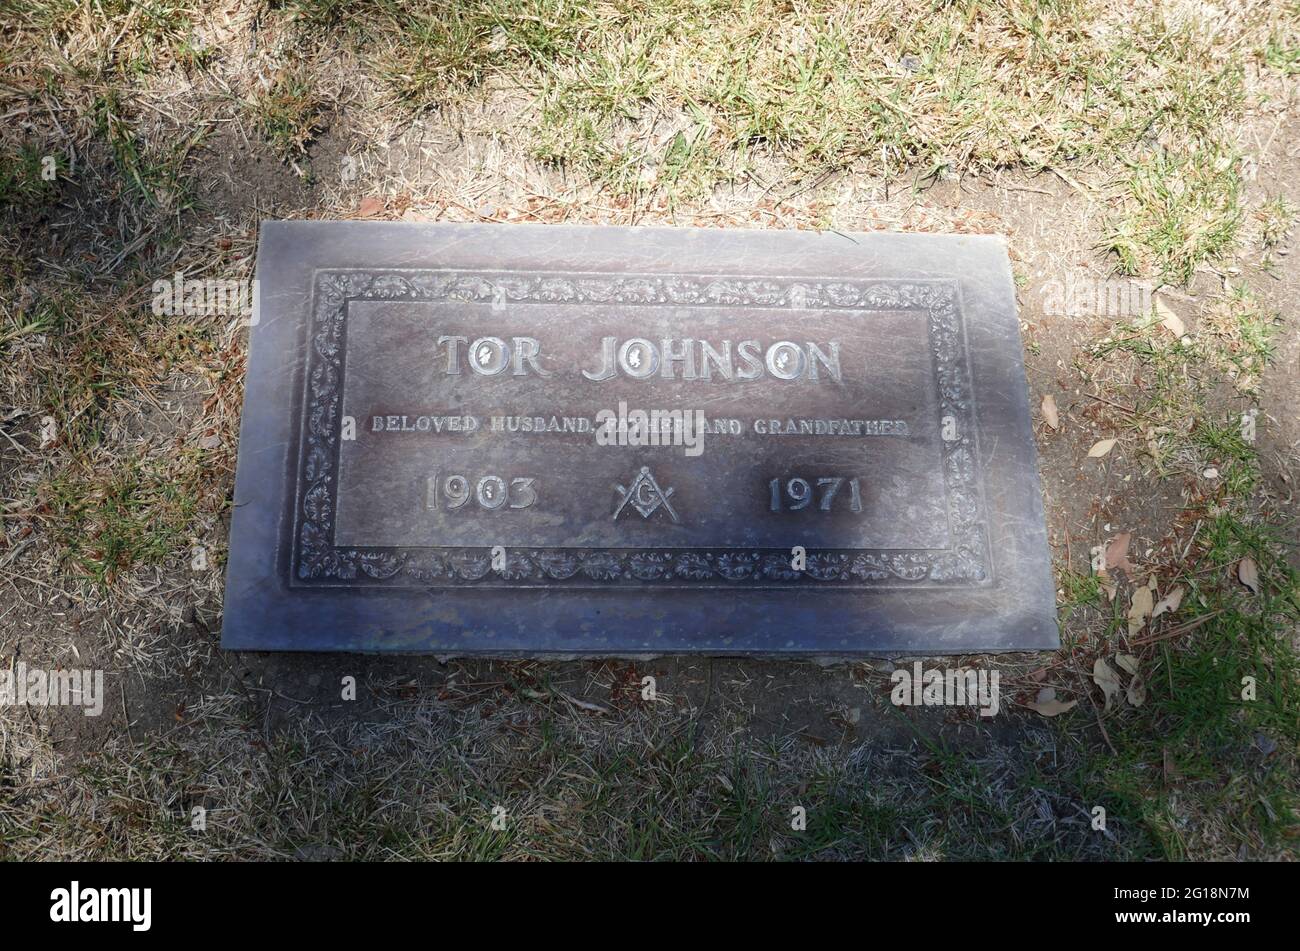 Newhall, California, USA 4th June 2021 A general view of atmosphere of actor Tor Johnson's Grave in Whispering Pines at Eternal Valley Memorial Park on June 4, 2021 at 23287 Sierra Hwy in Newhall, California, USA. Photo by Barry King/Alamy Stock Photo Stock Photo